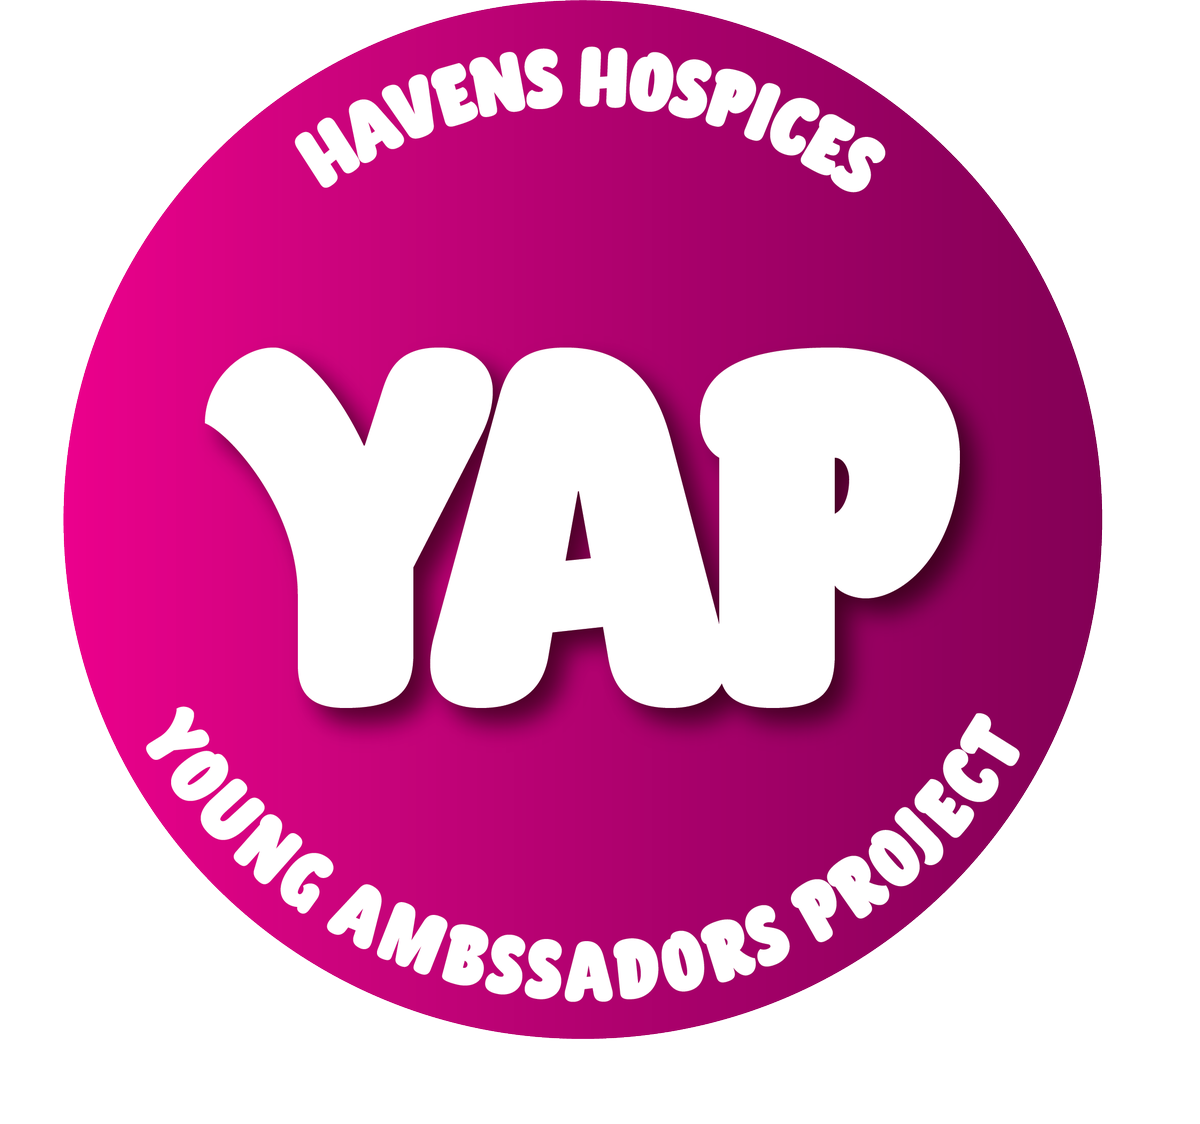 Find out about our @HavensHospices #YoungAmbassadorsProject for 16-18 year olds - havenshospices.org.uk/volunteer-at-h… 
#CommunityExperienceEvolve @SweynePark @FitzWimarcSch @ChaseHighSch @BelfairsAcademy @WHSforBoys @OfficialSHSG @WHSG1920